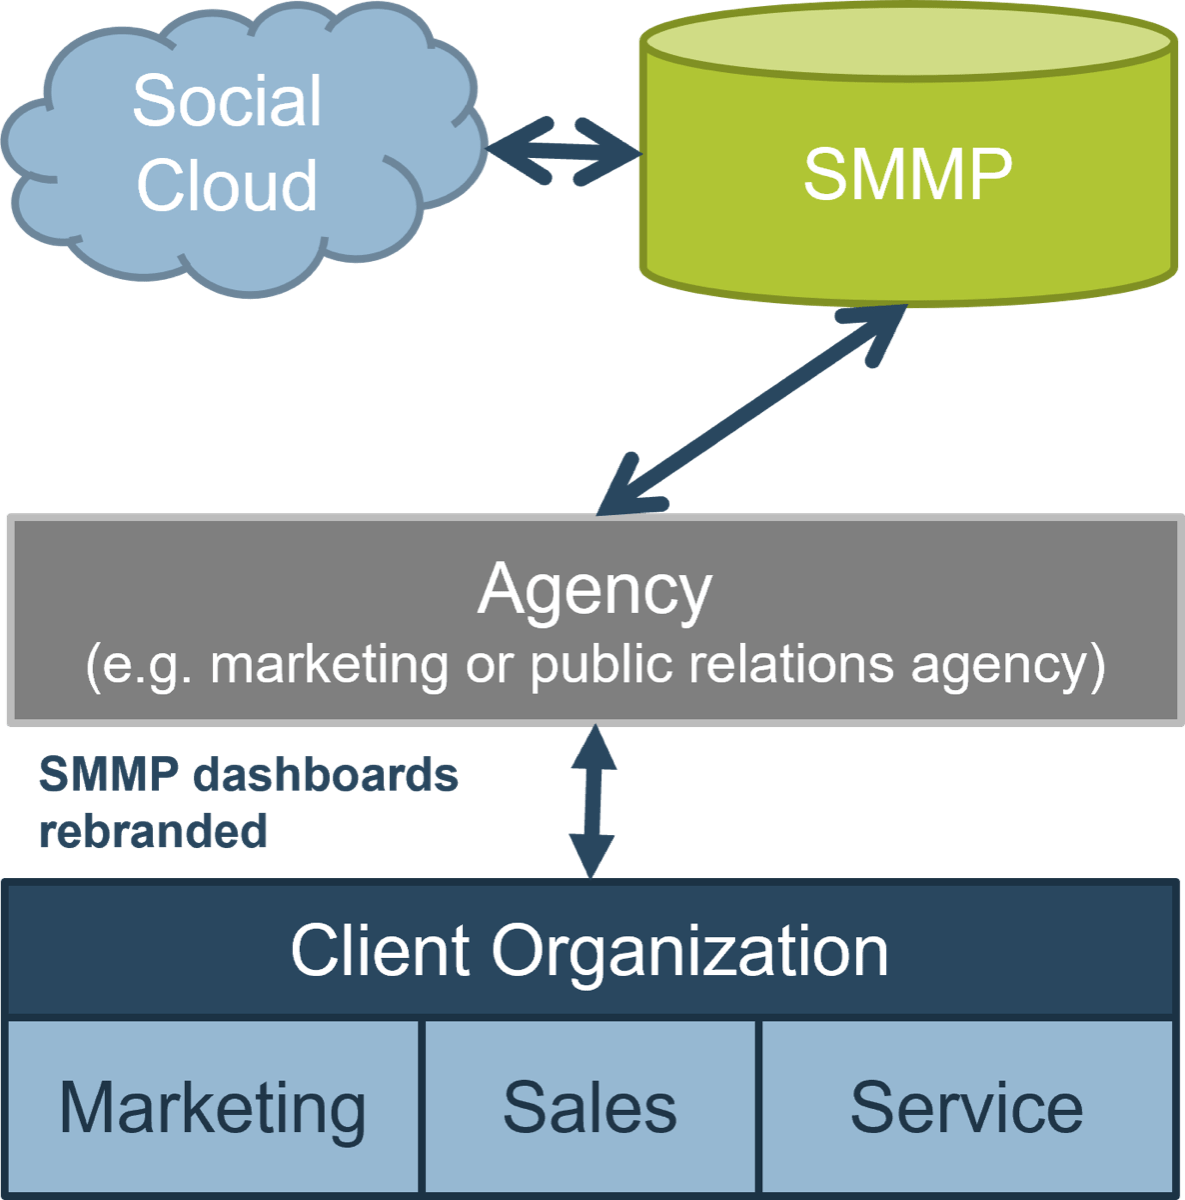 Visual of the Agency Model with the 'Social Cloud' attached to the 'SMMP' attached to the 'Agency (e.g. marketing or public relations agency)' attached to the 'Client Organization (Marketing, Sales, Service)'